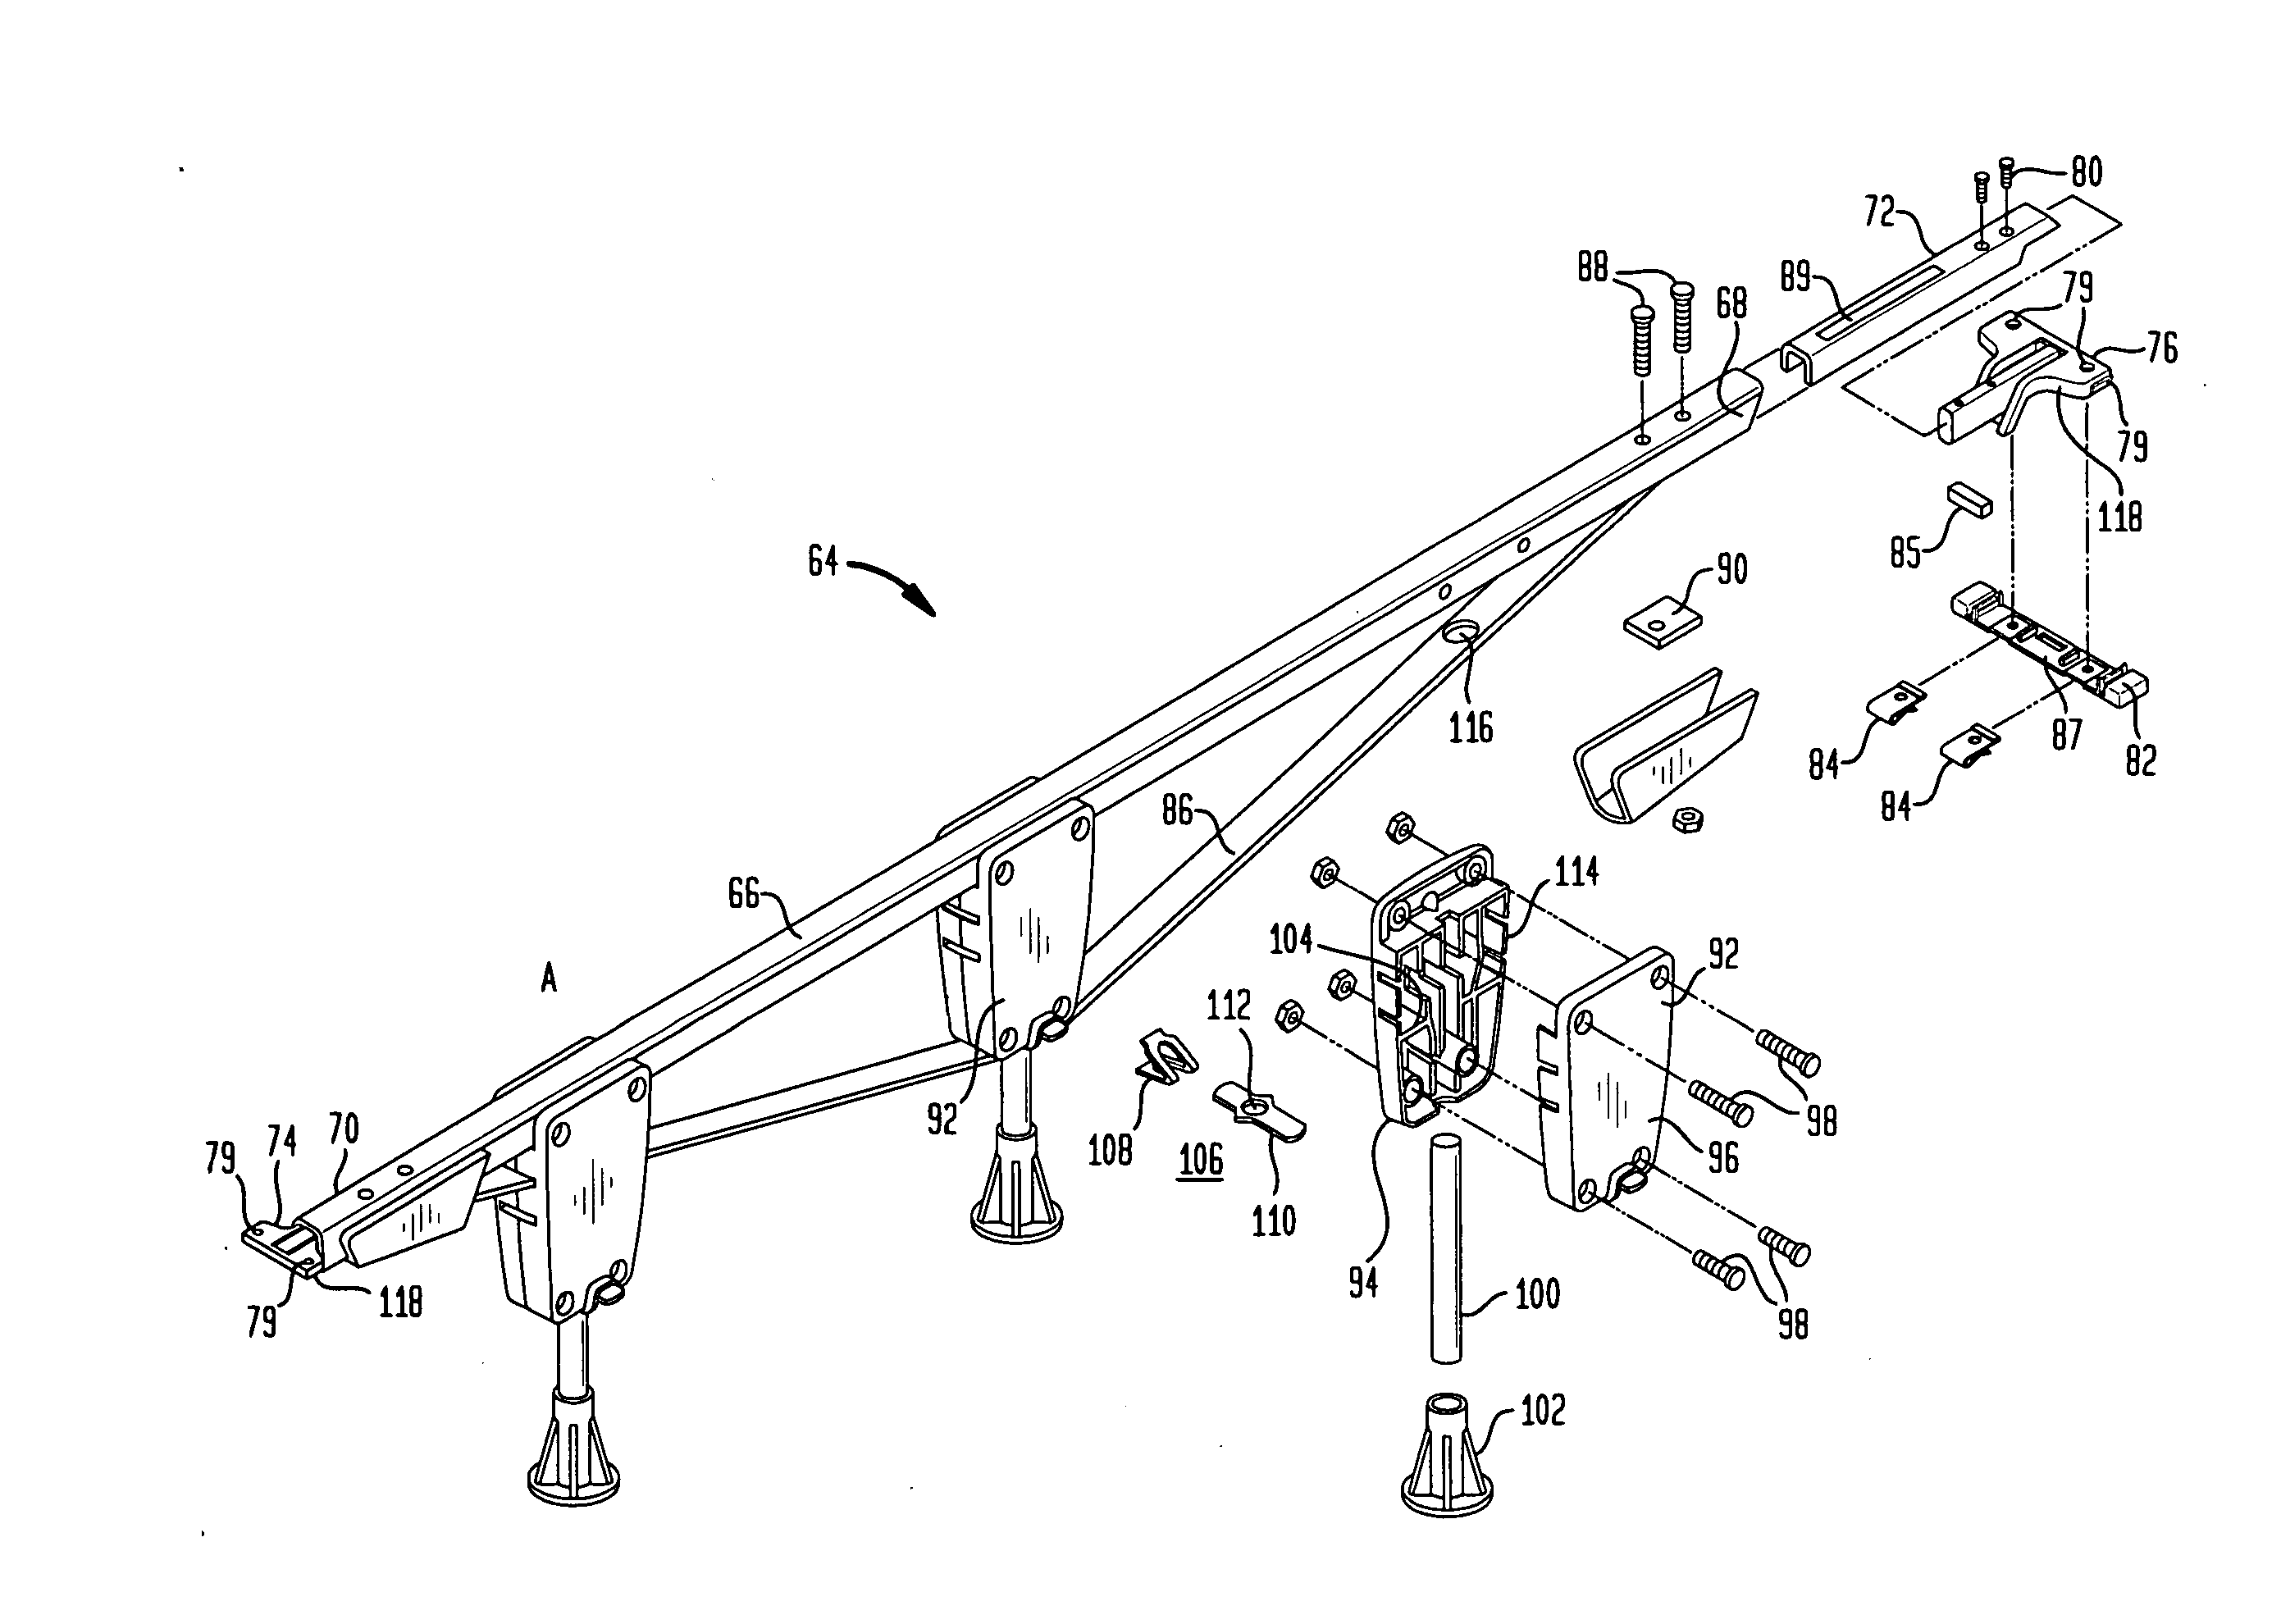 Support member and system for affixation to bed rails or bed frame